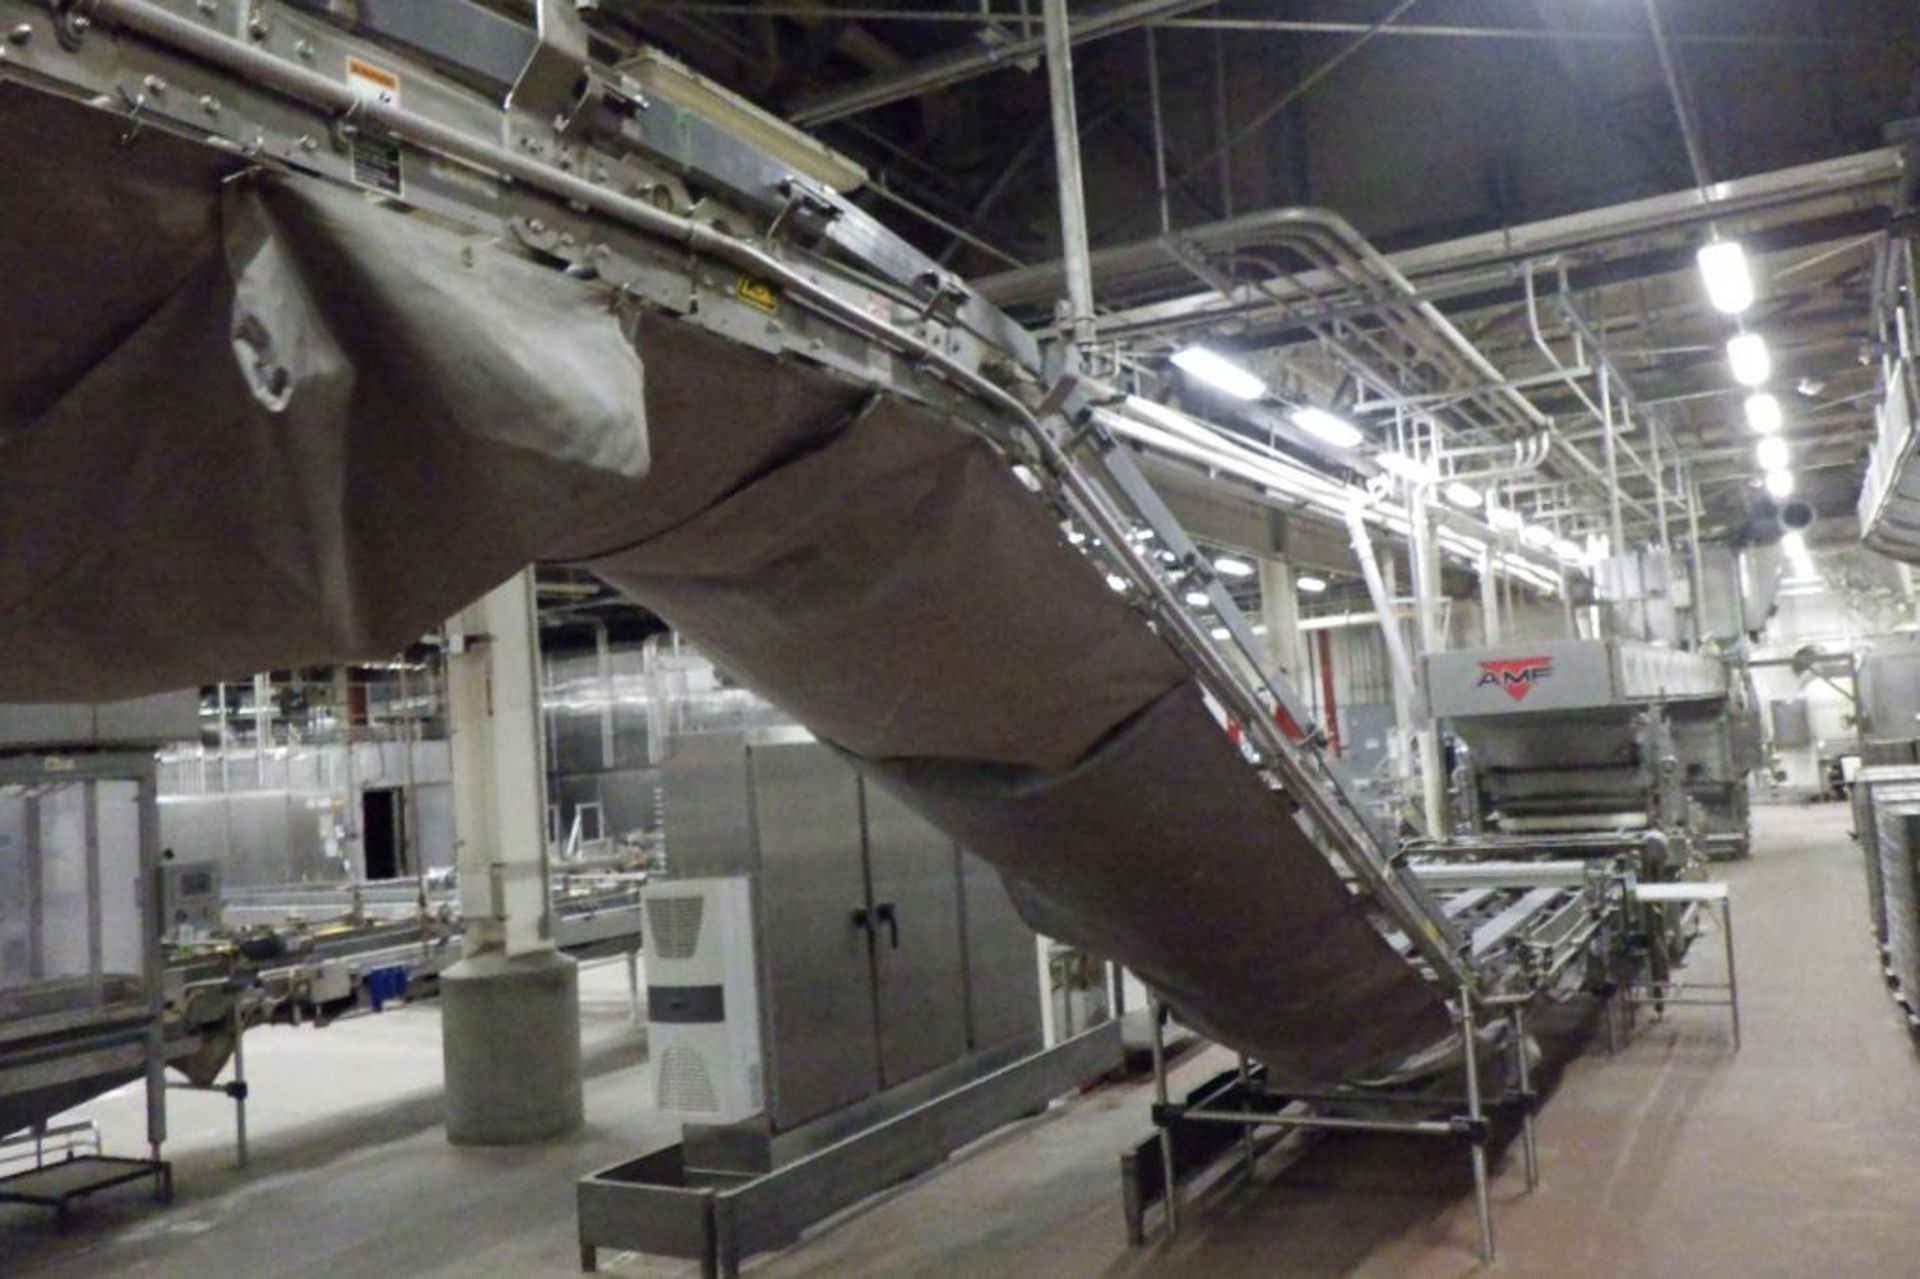 Stewart systems empty pan conveyor - Image 16 of 27